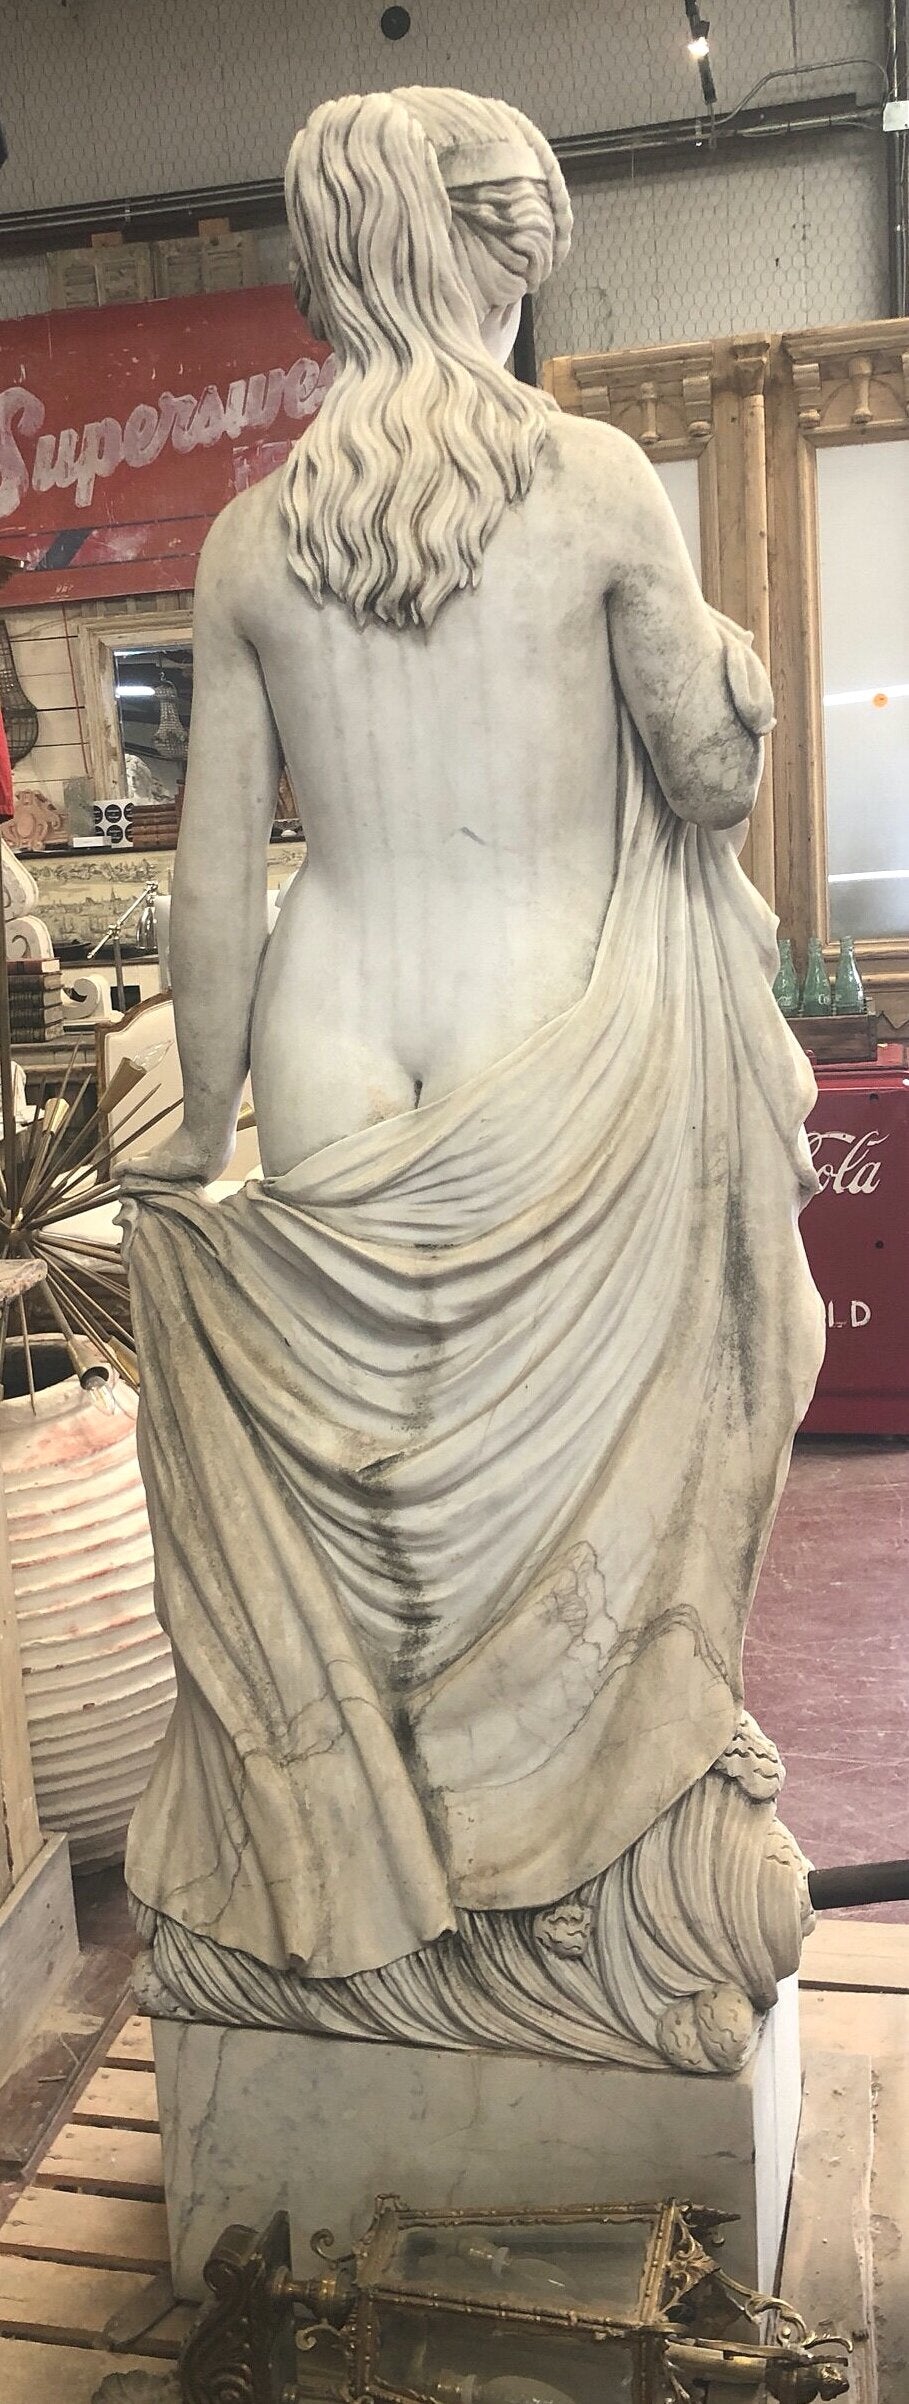 Marble statue